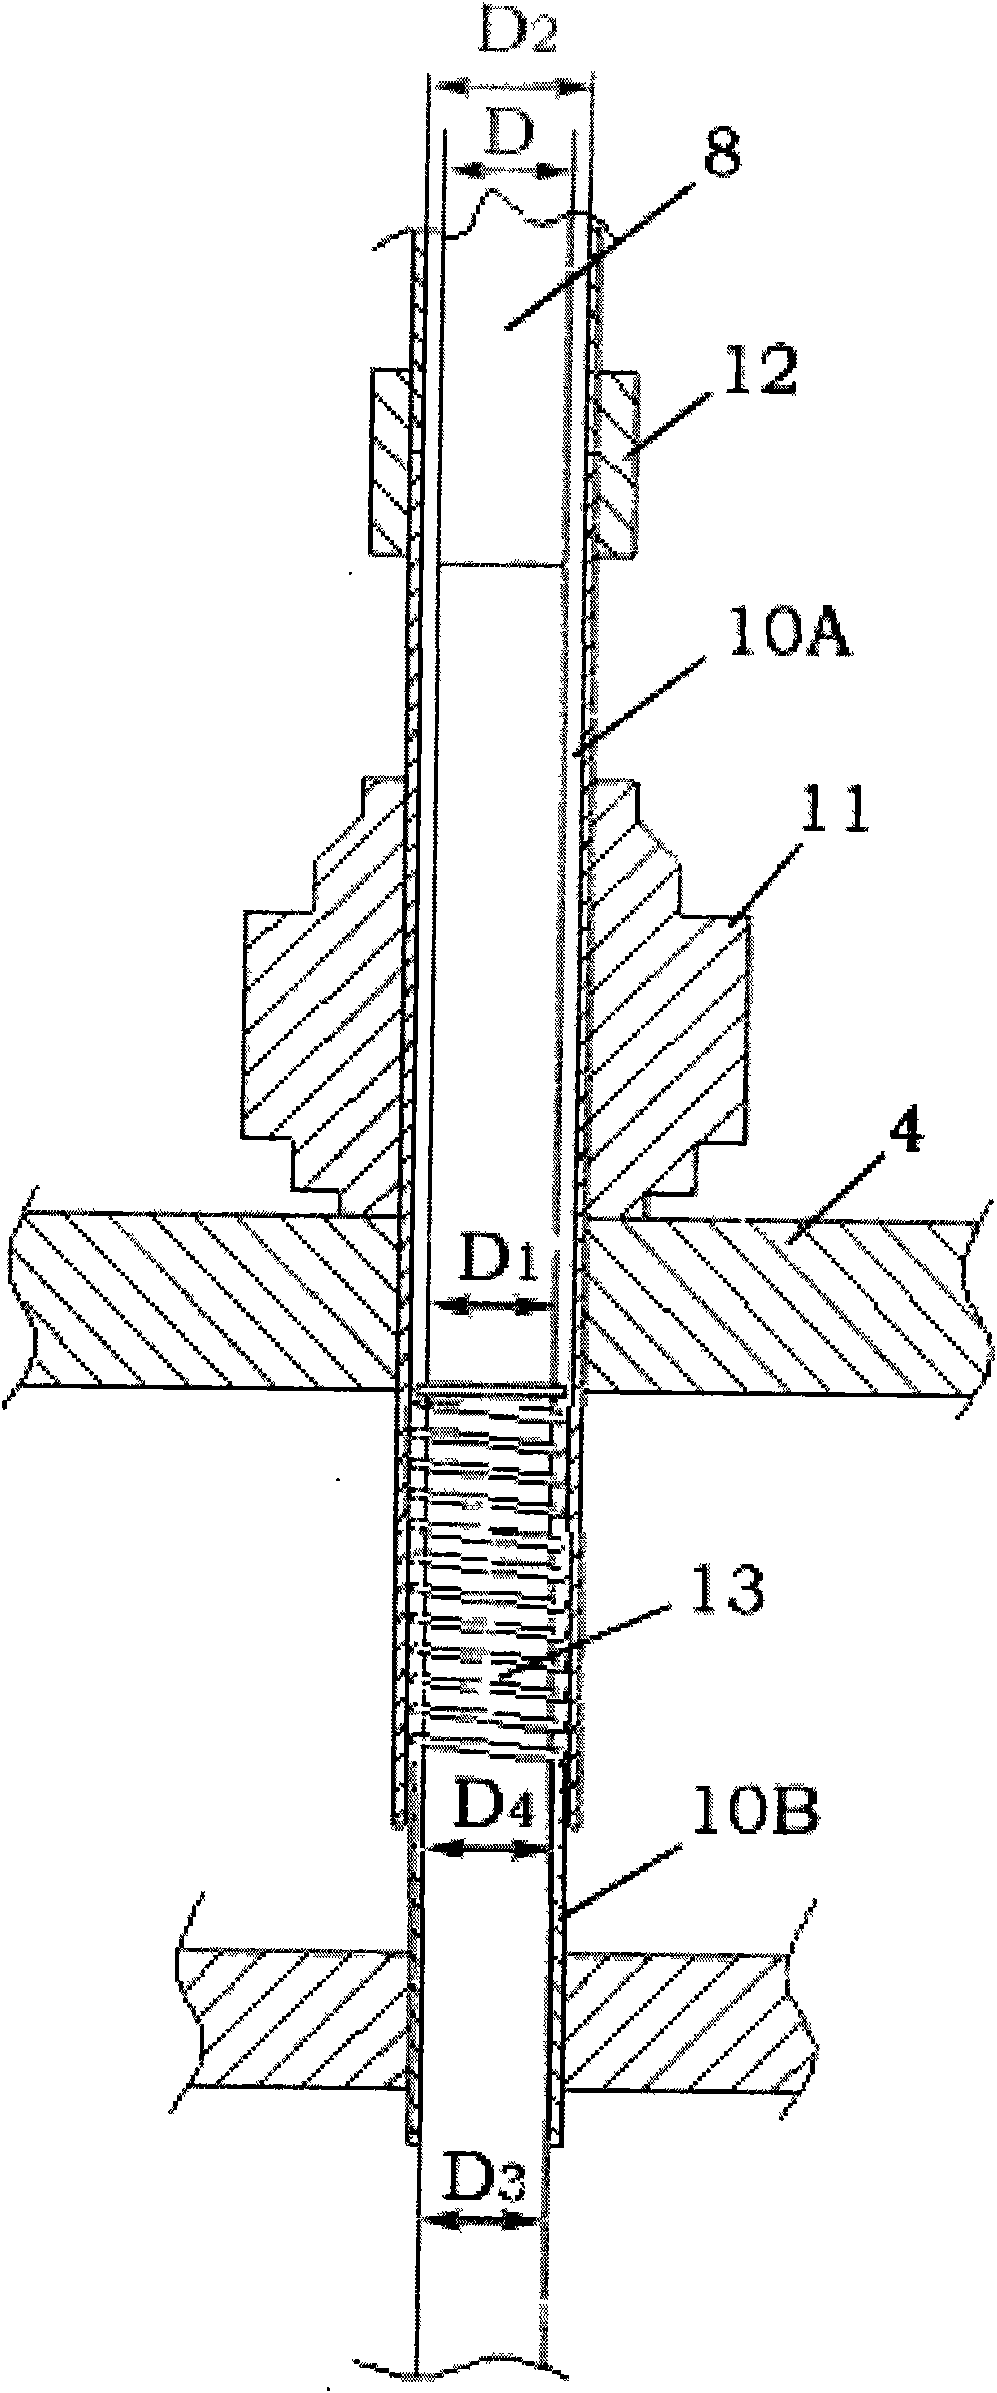 Device and method for detecting bimetallic thermo-sensitive property